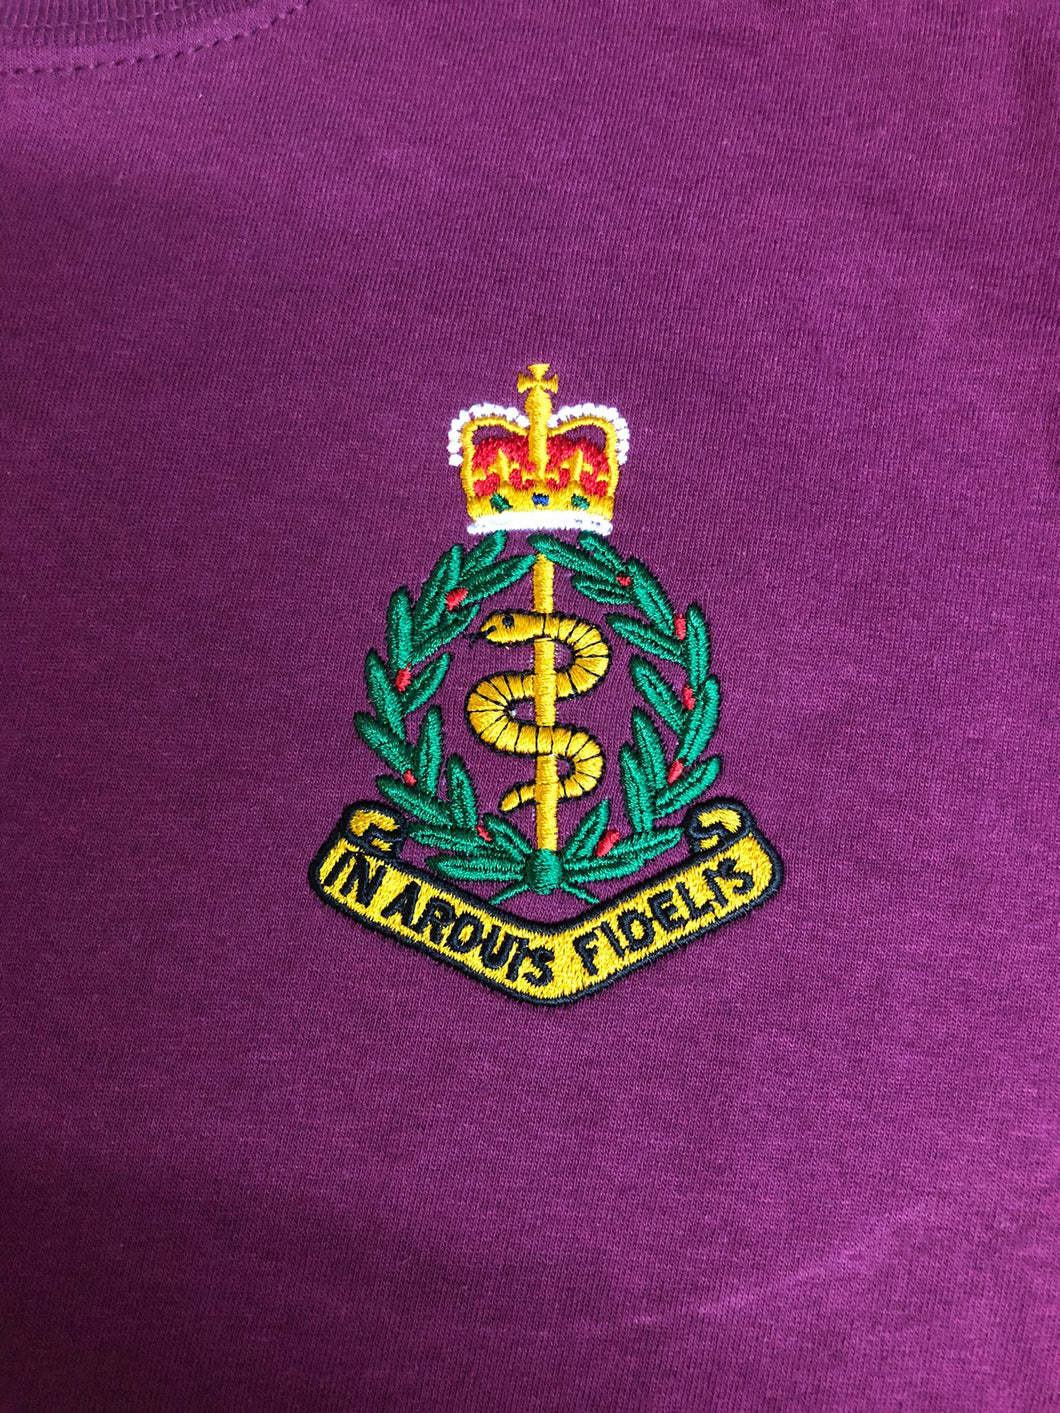 Royal Army Medical Corps (RAMC) - Embroidered - Choose your Garment